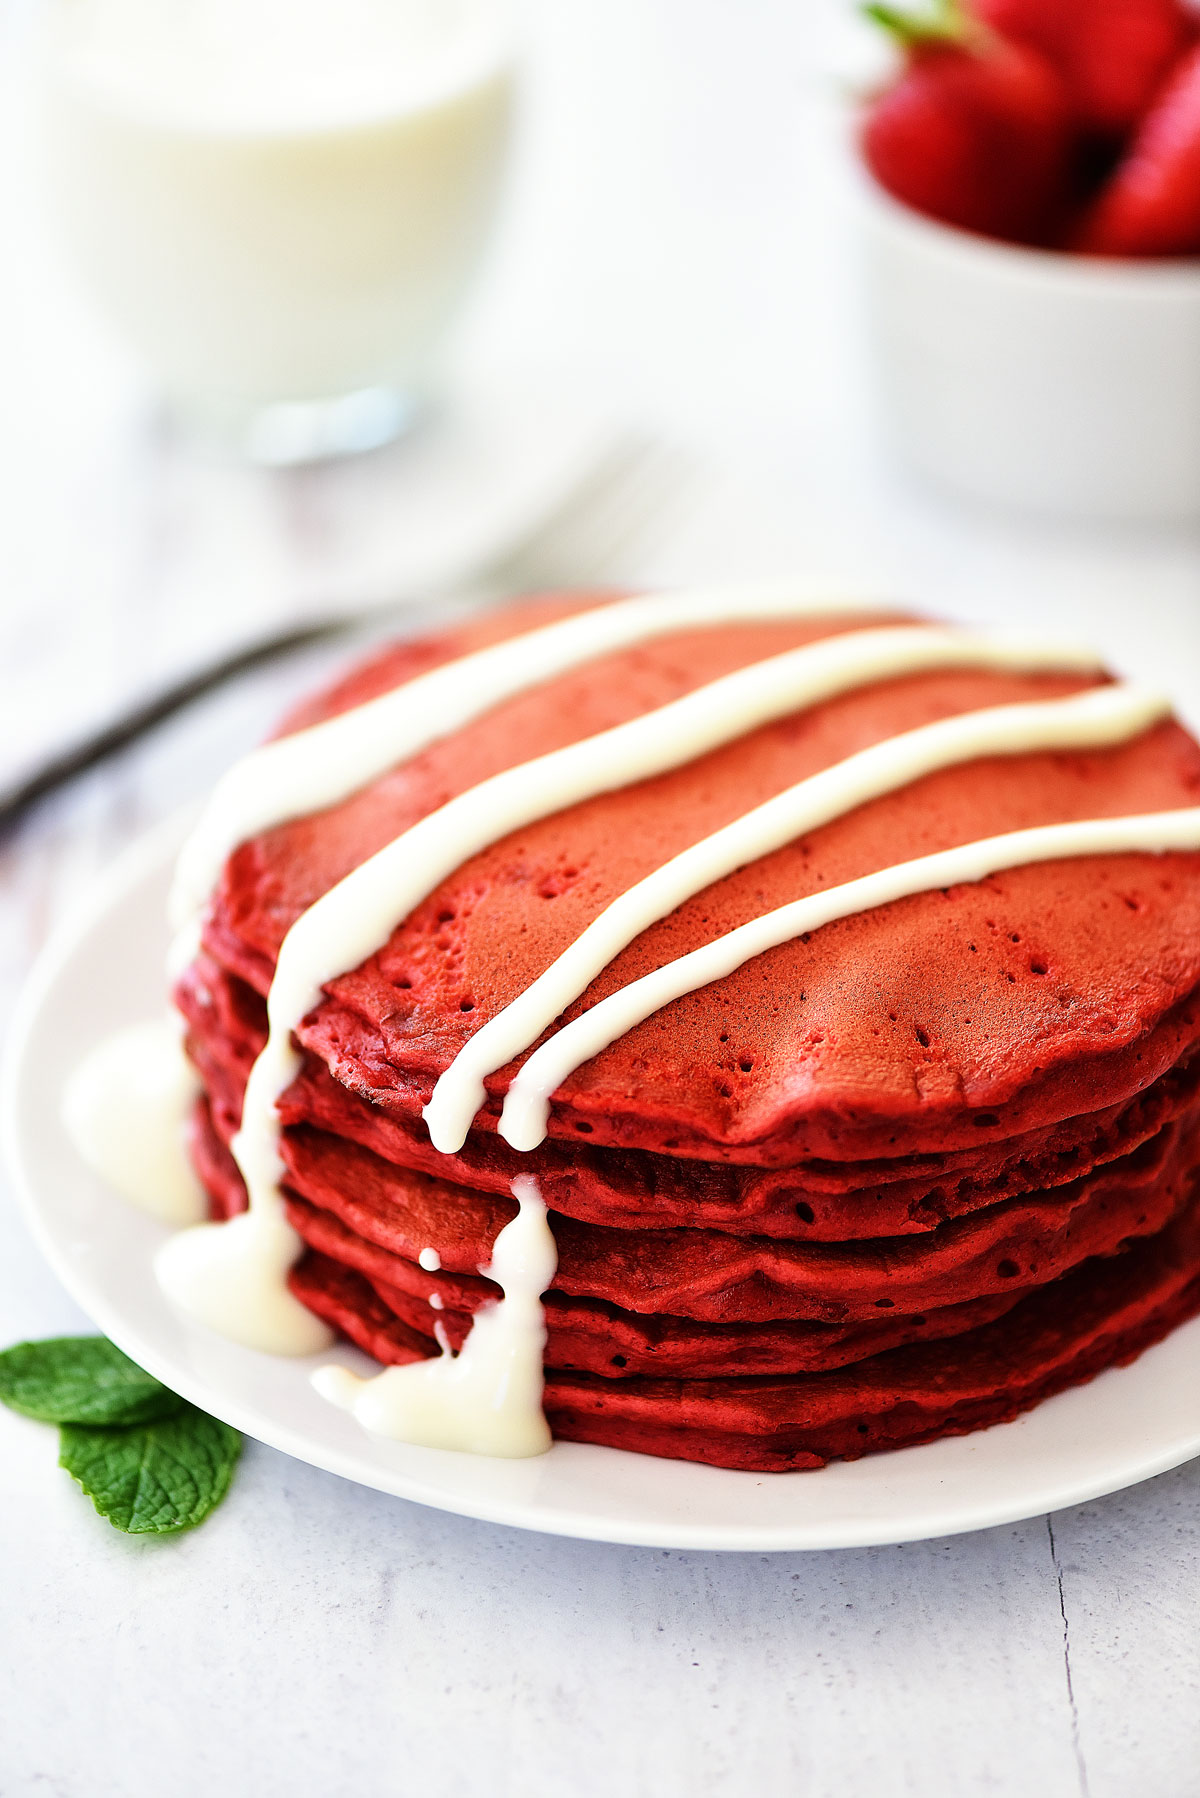 Red Velvet Pancakes are light and fluffy bright red pancakes with an incredible cream cheese glaze to drizzle over the tops. Life-in-the-Lofthouse.com